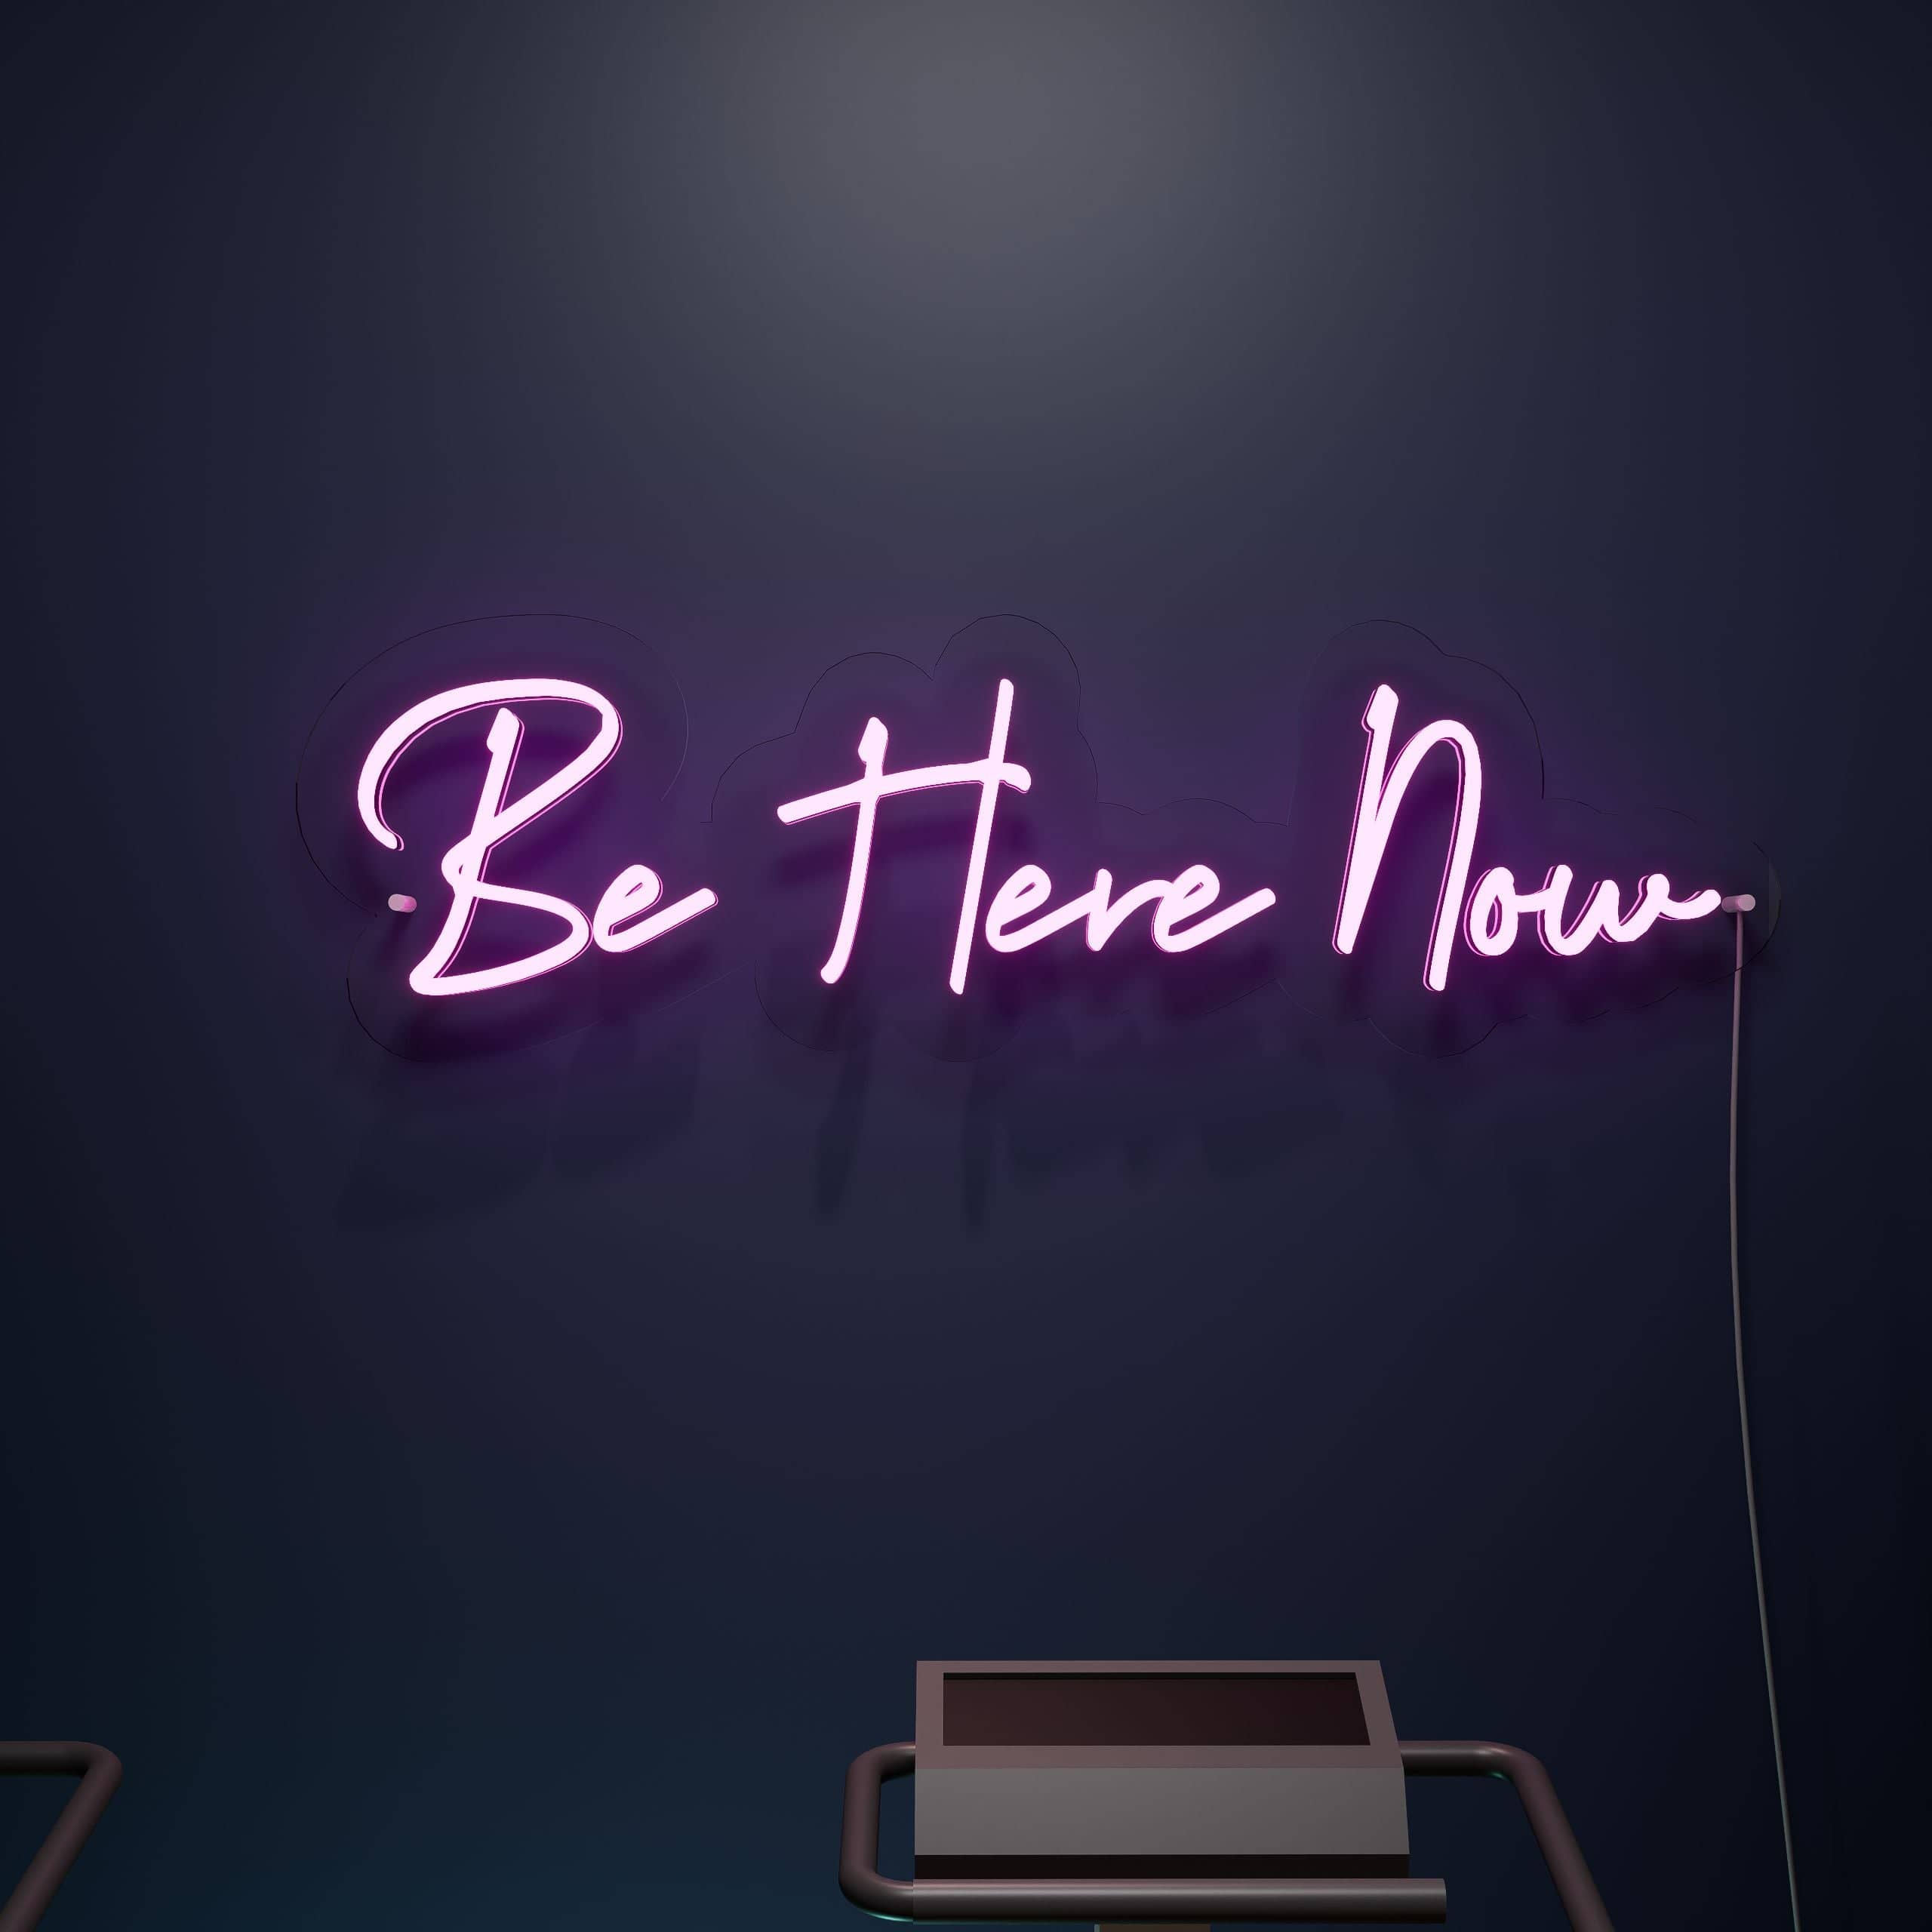 embrace-the-present-moment-neon-sign-lite